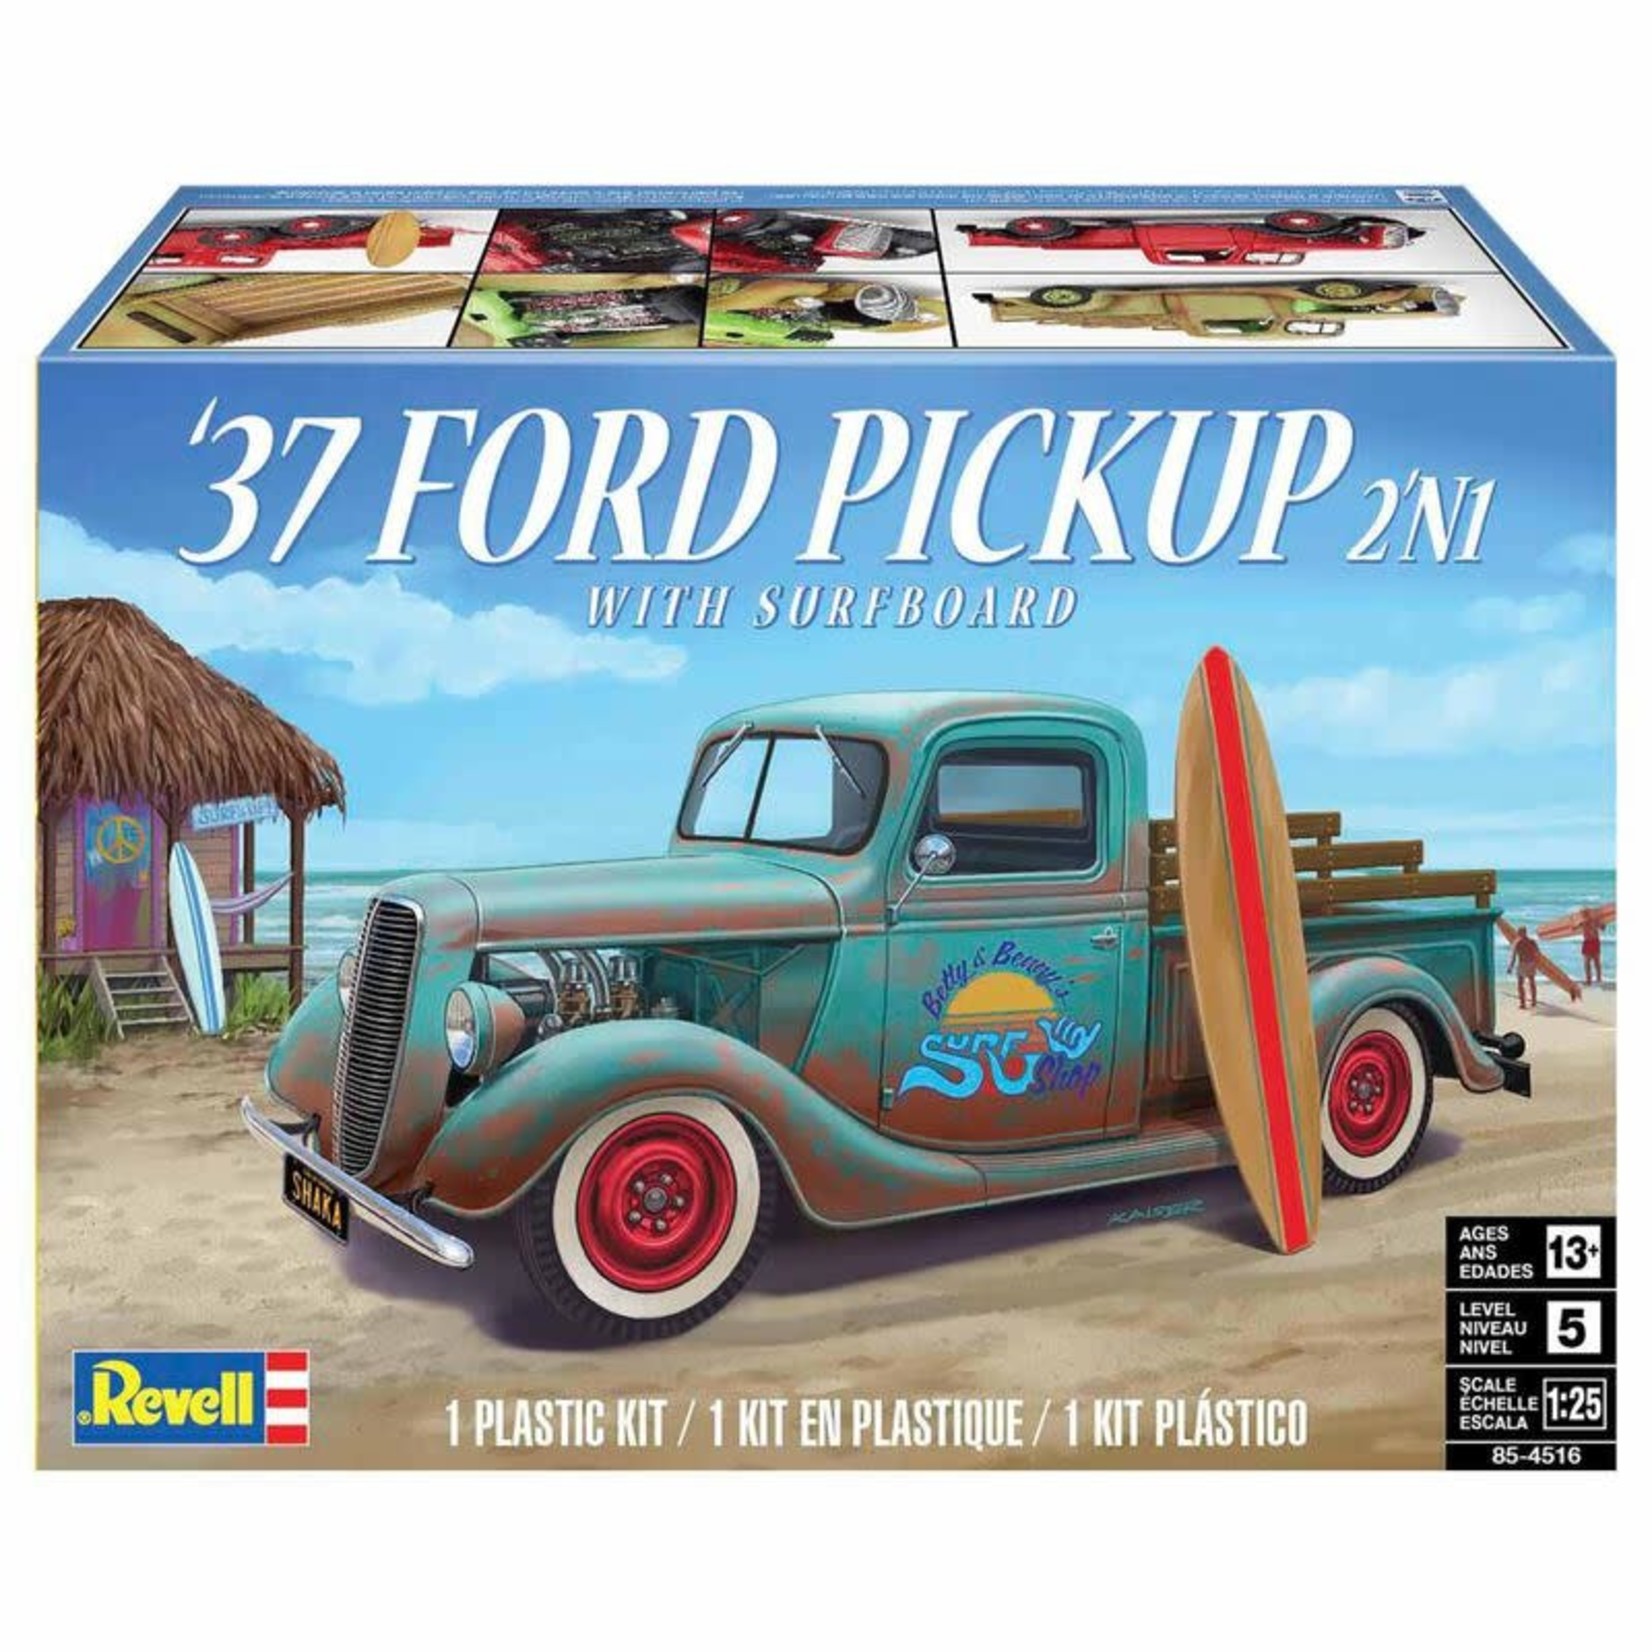 Revell 1/25 37 Ford Pickup 2n1 with Surfboard Kit